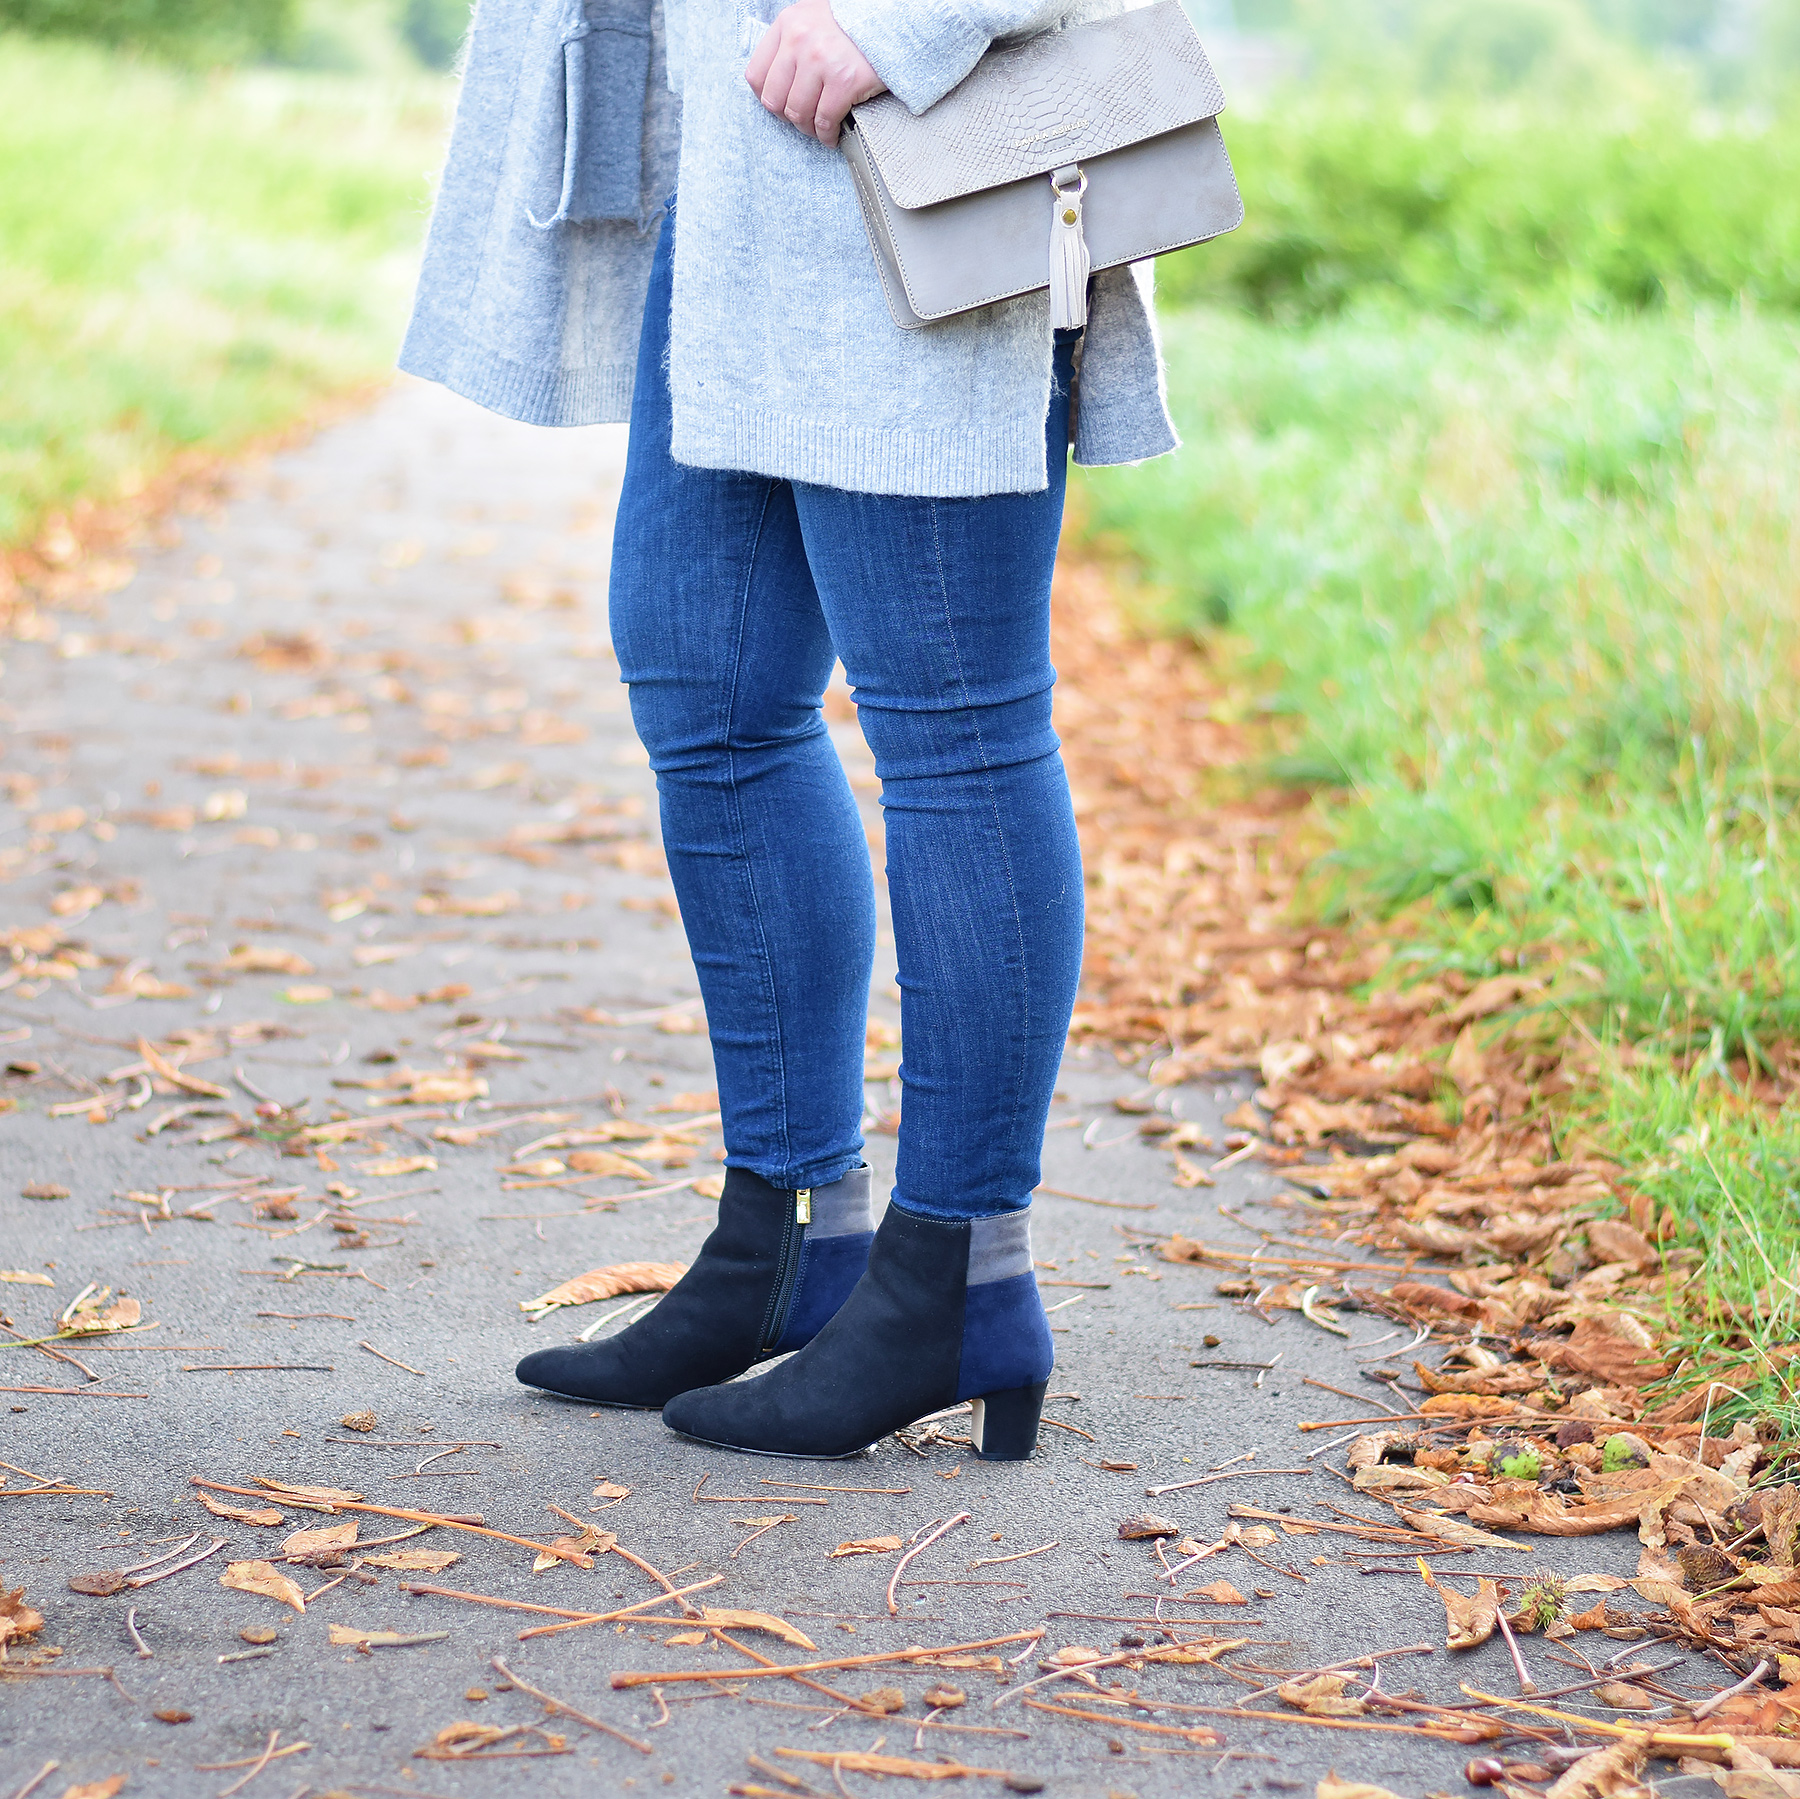 Lotus Colourblock Mid Heel ankle boots in black navy and grey